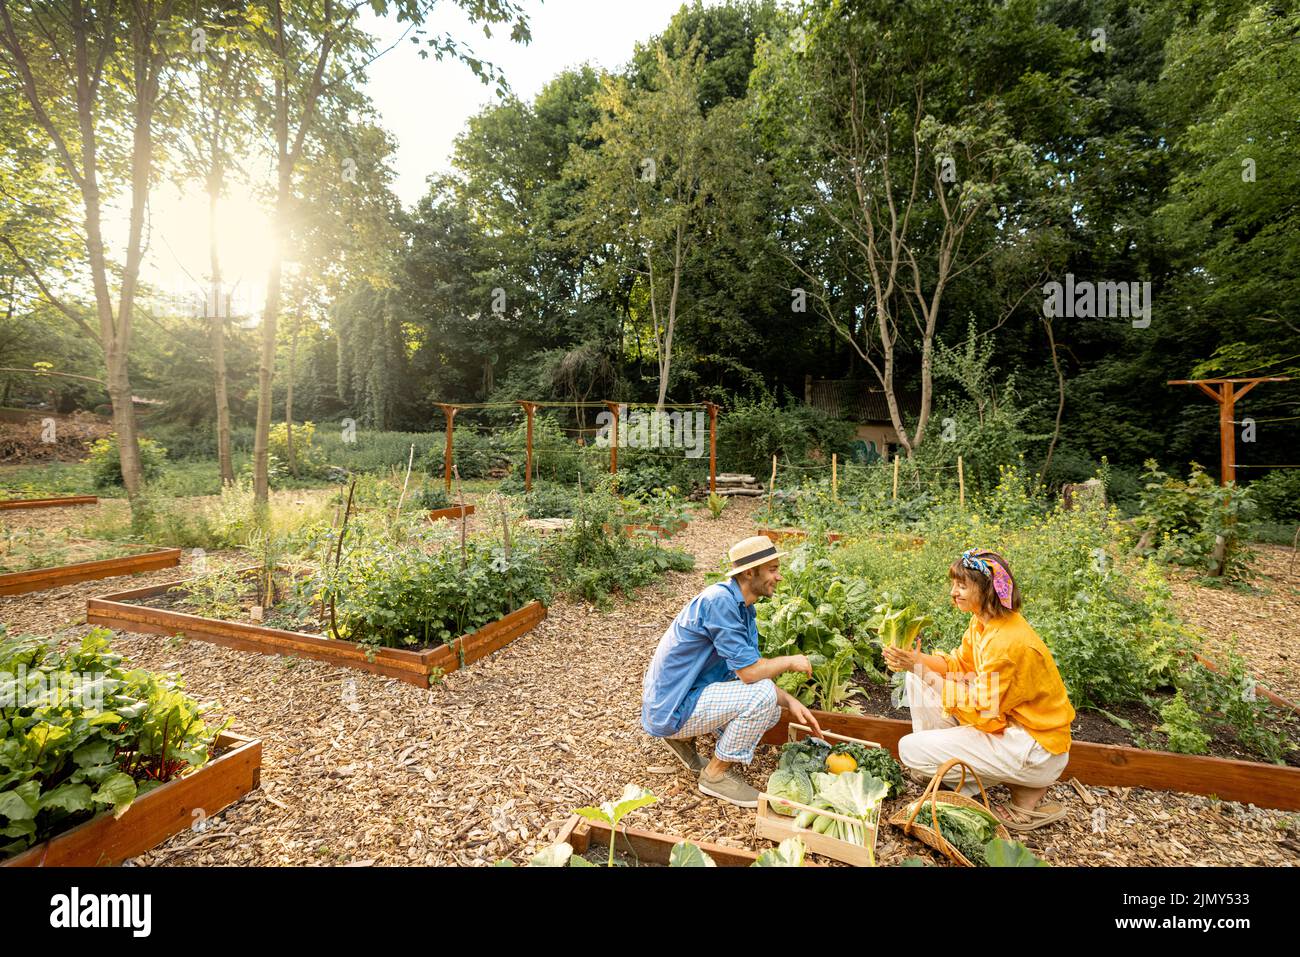 Man and woman harvesting greens at home garden Stock Photo